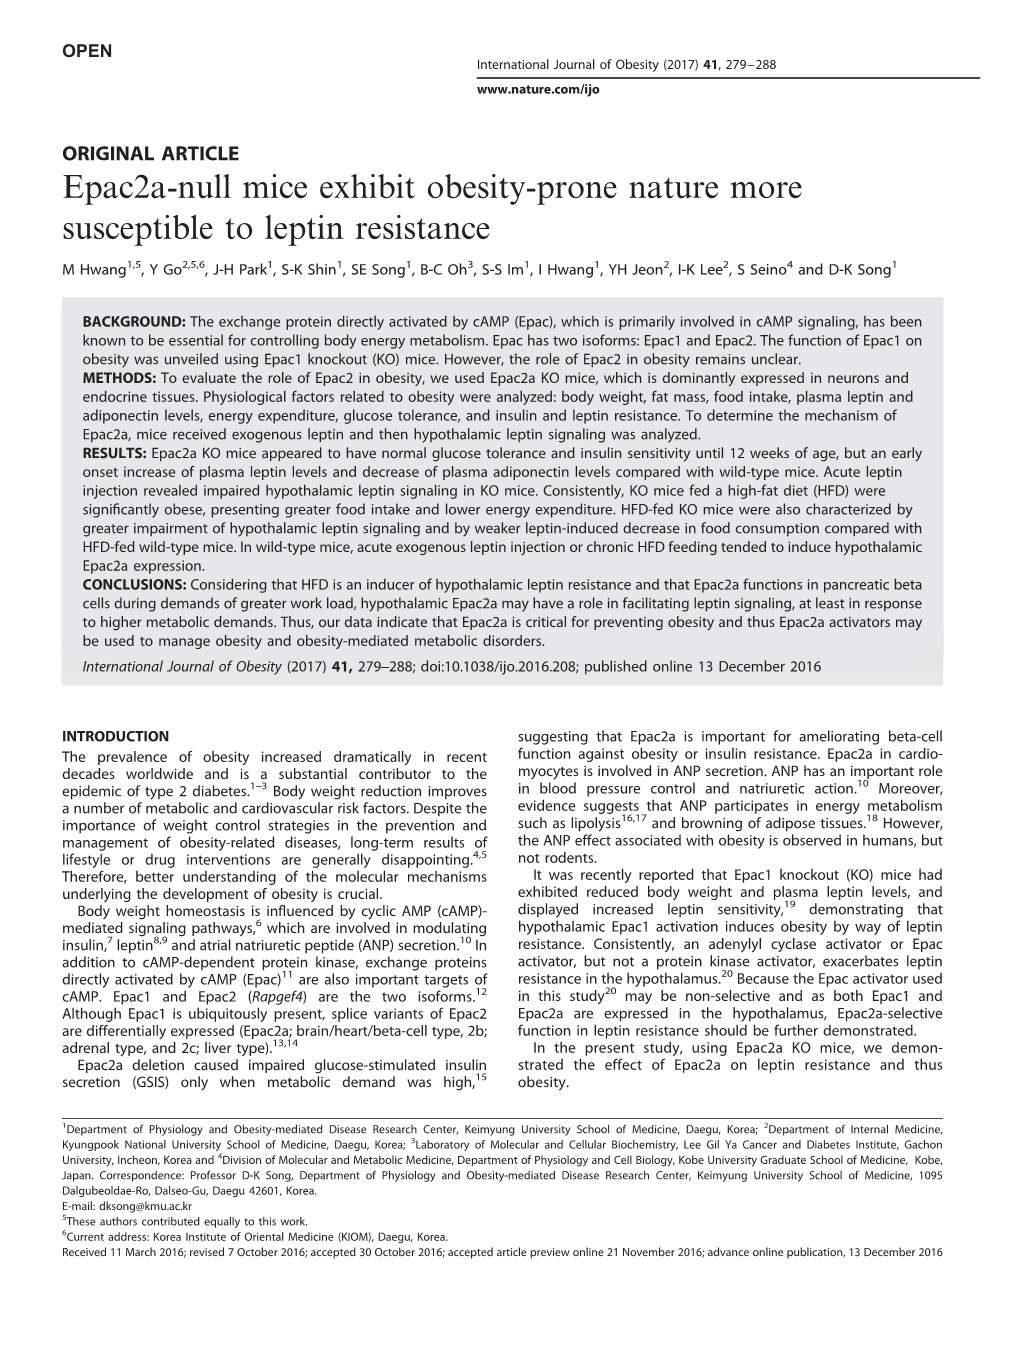 Epac2a-Null Mice Exhibit Obesity-Prone Nature More Susceptible to Leptin Resistance